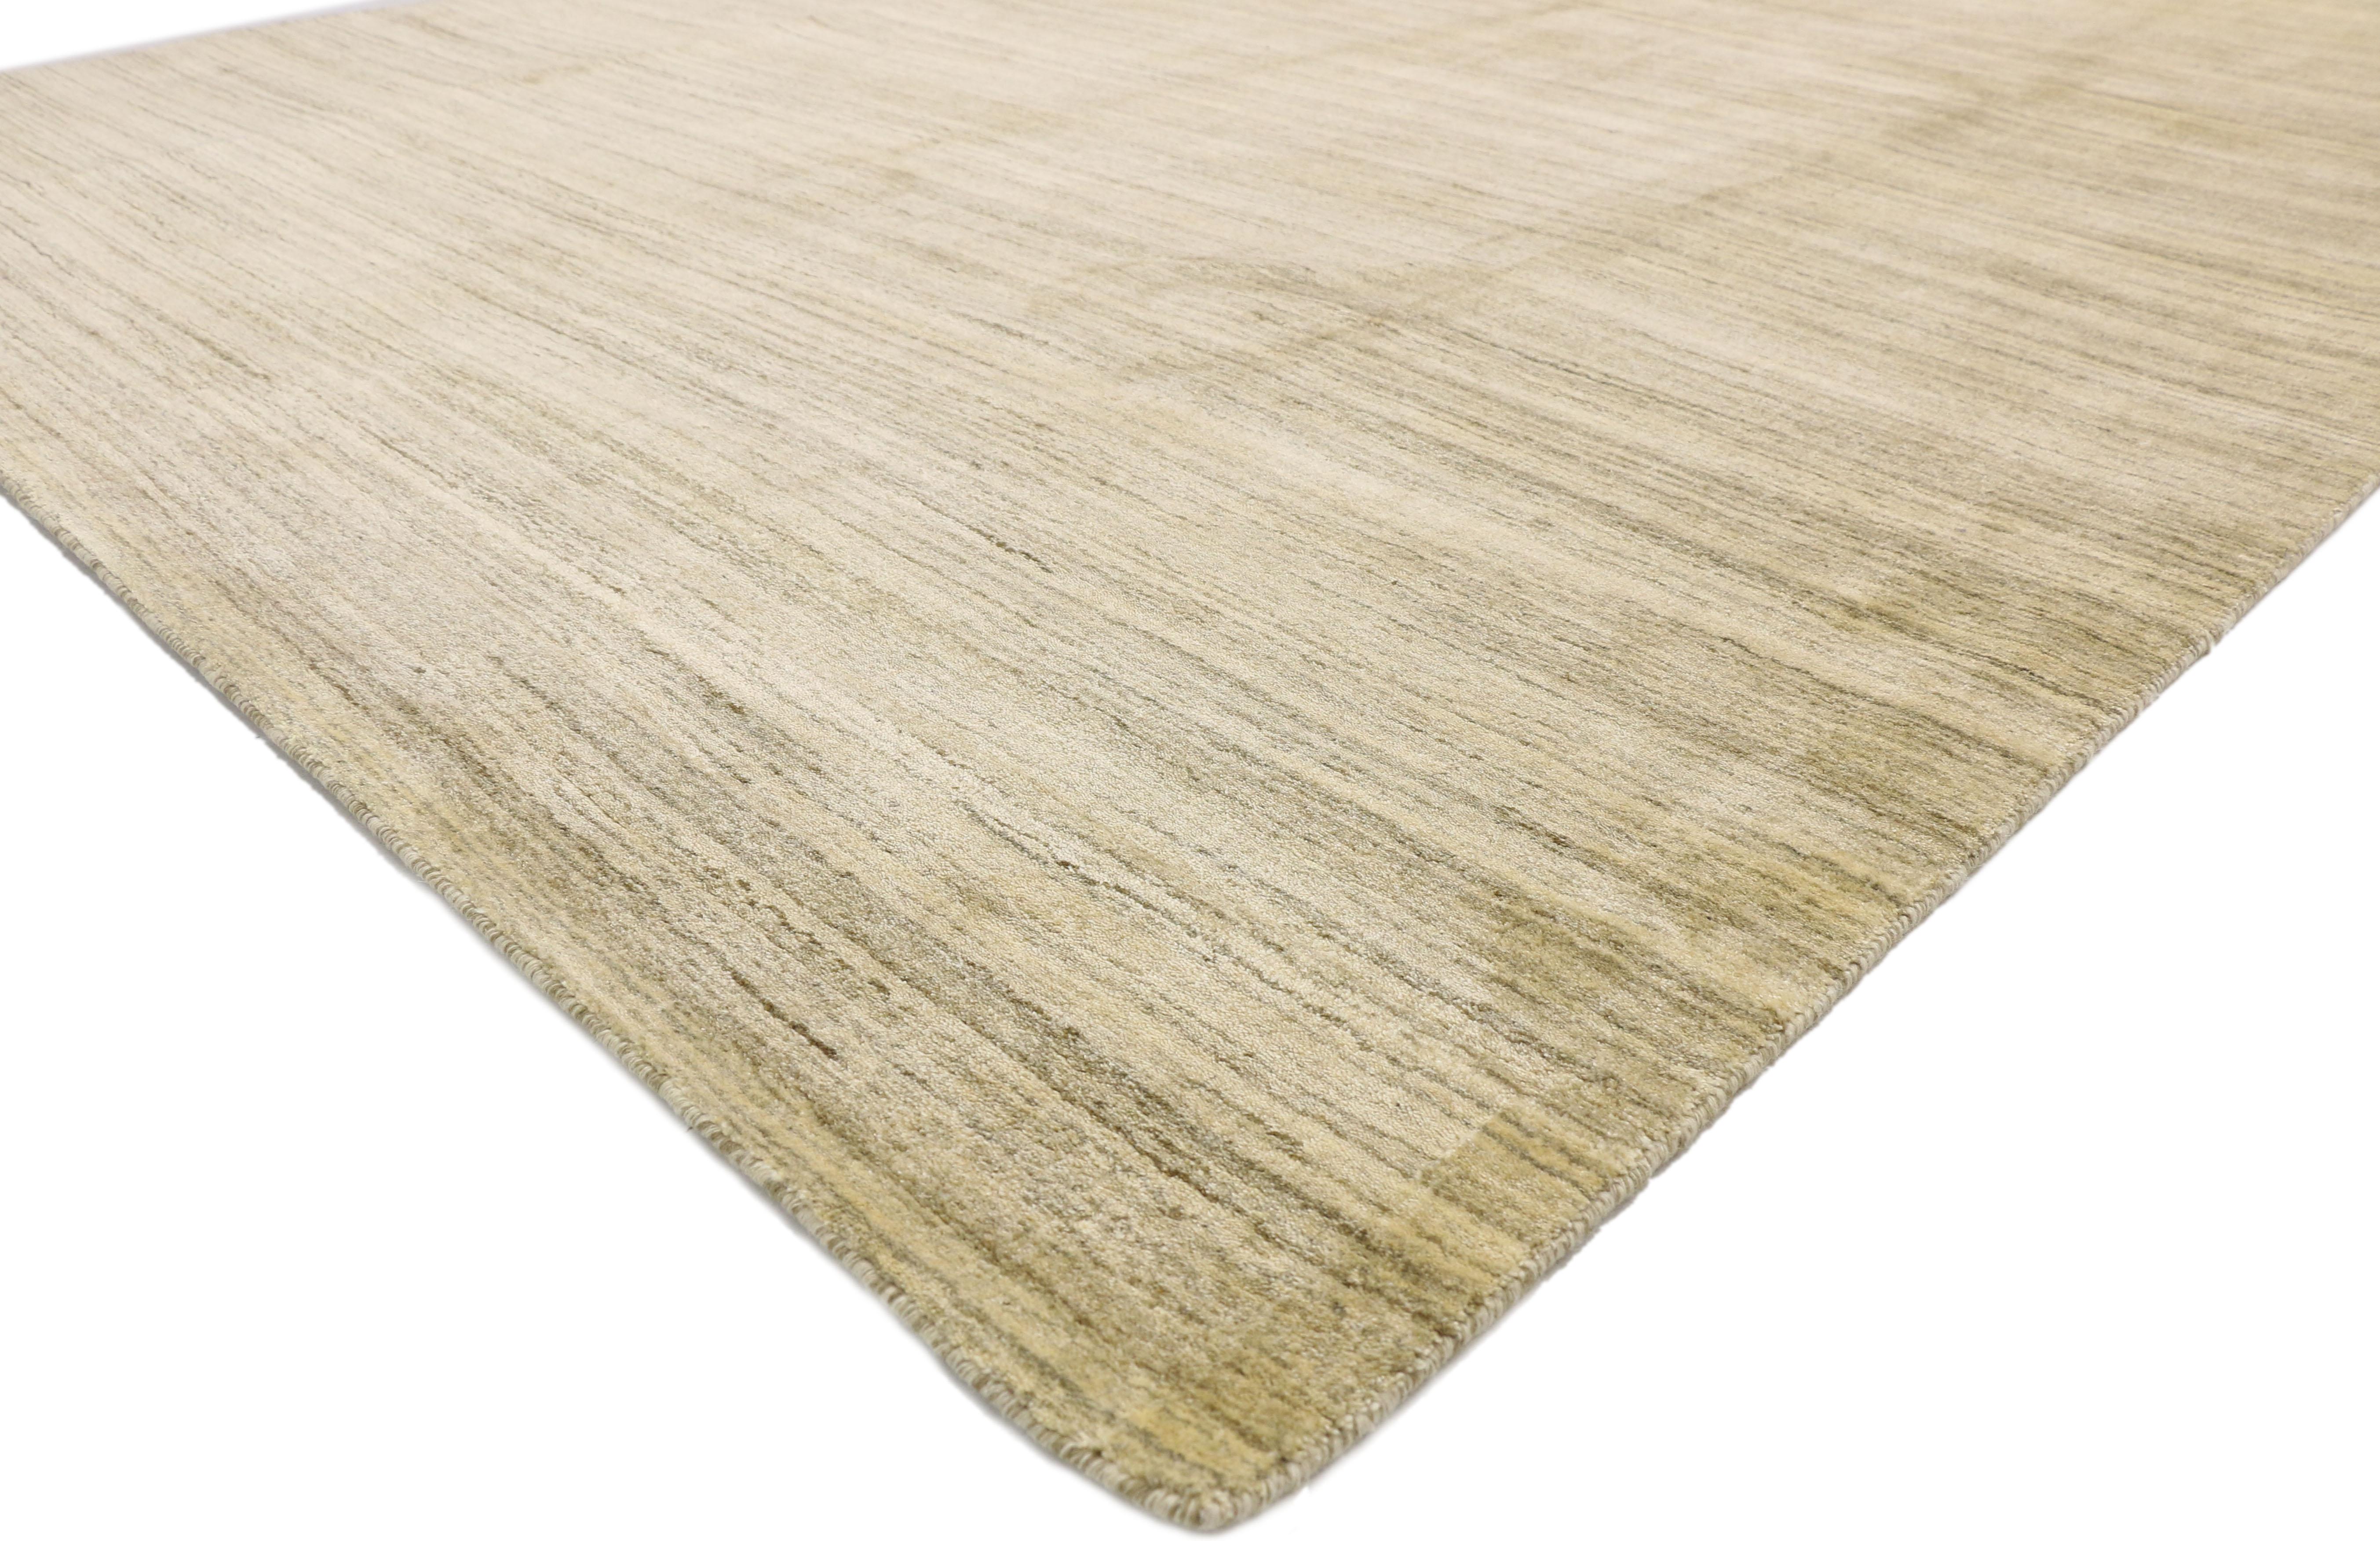 30458 new transitional area rug with cozy, Hygge vibes and warm Amish-Shaker style. This neutral transitional area rug emanates function and versatility with warm, hygge vibes. It features striations of subtle colors running across the width in